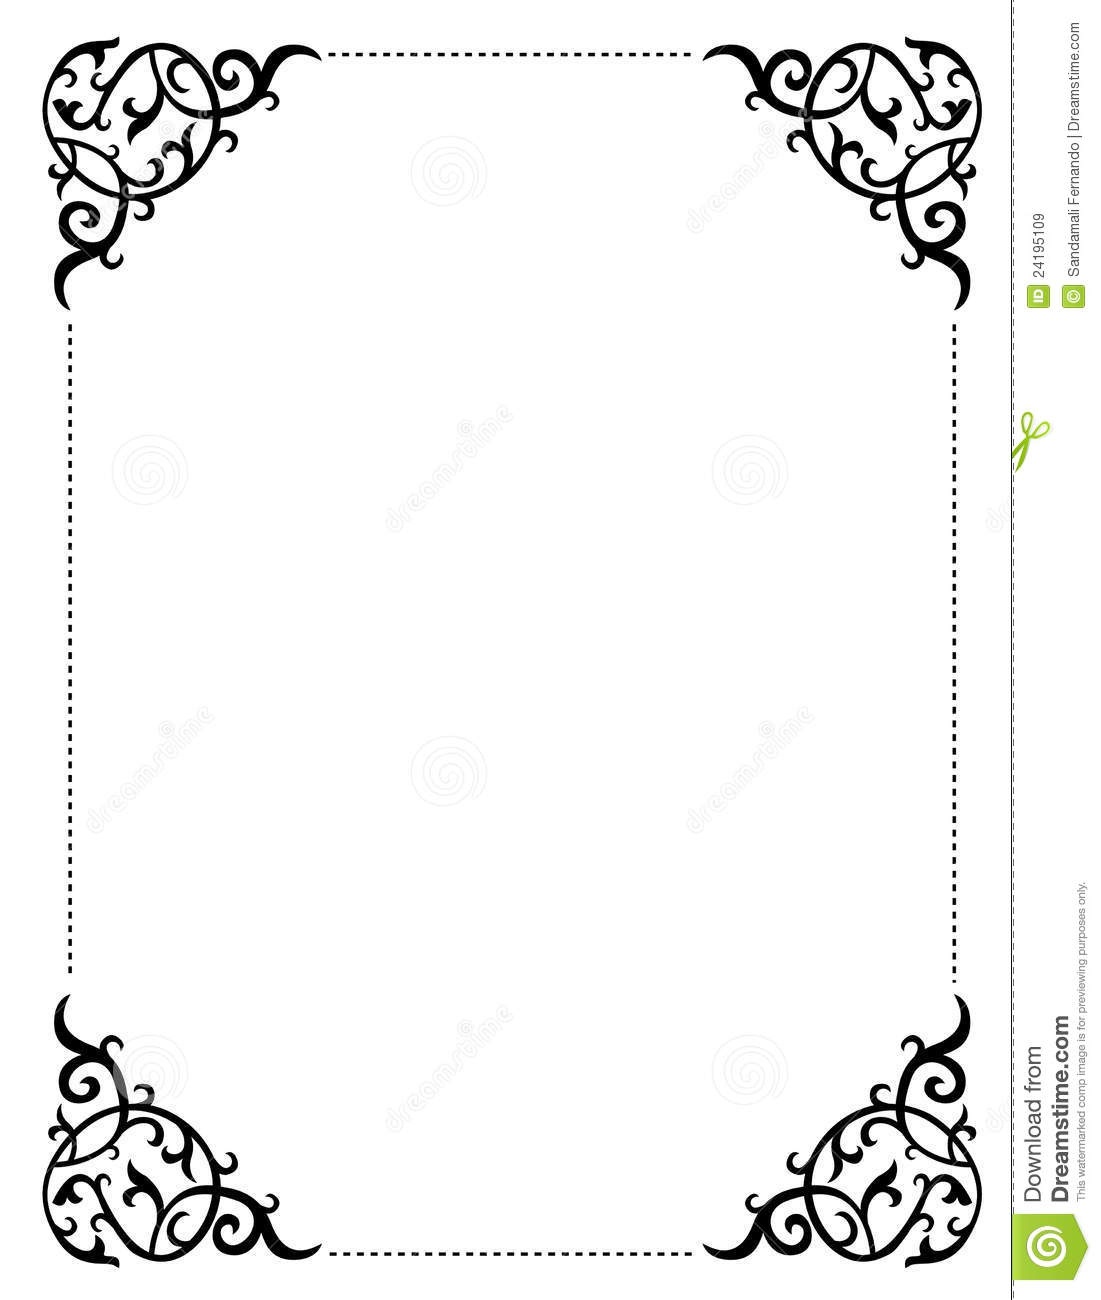 Printable Clipart Borders | Free Download Best Printable Clipart - Free Printable Borders And Frames